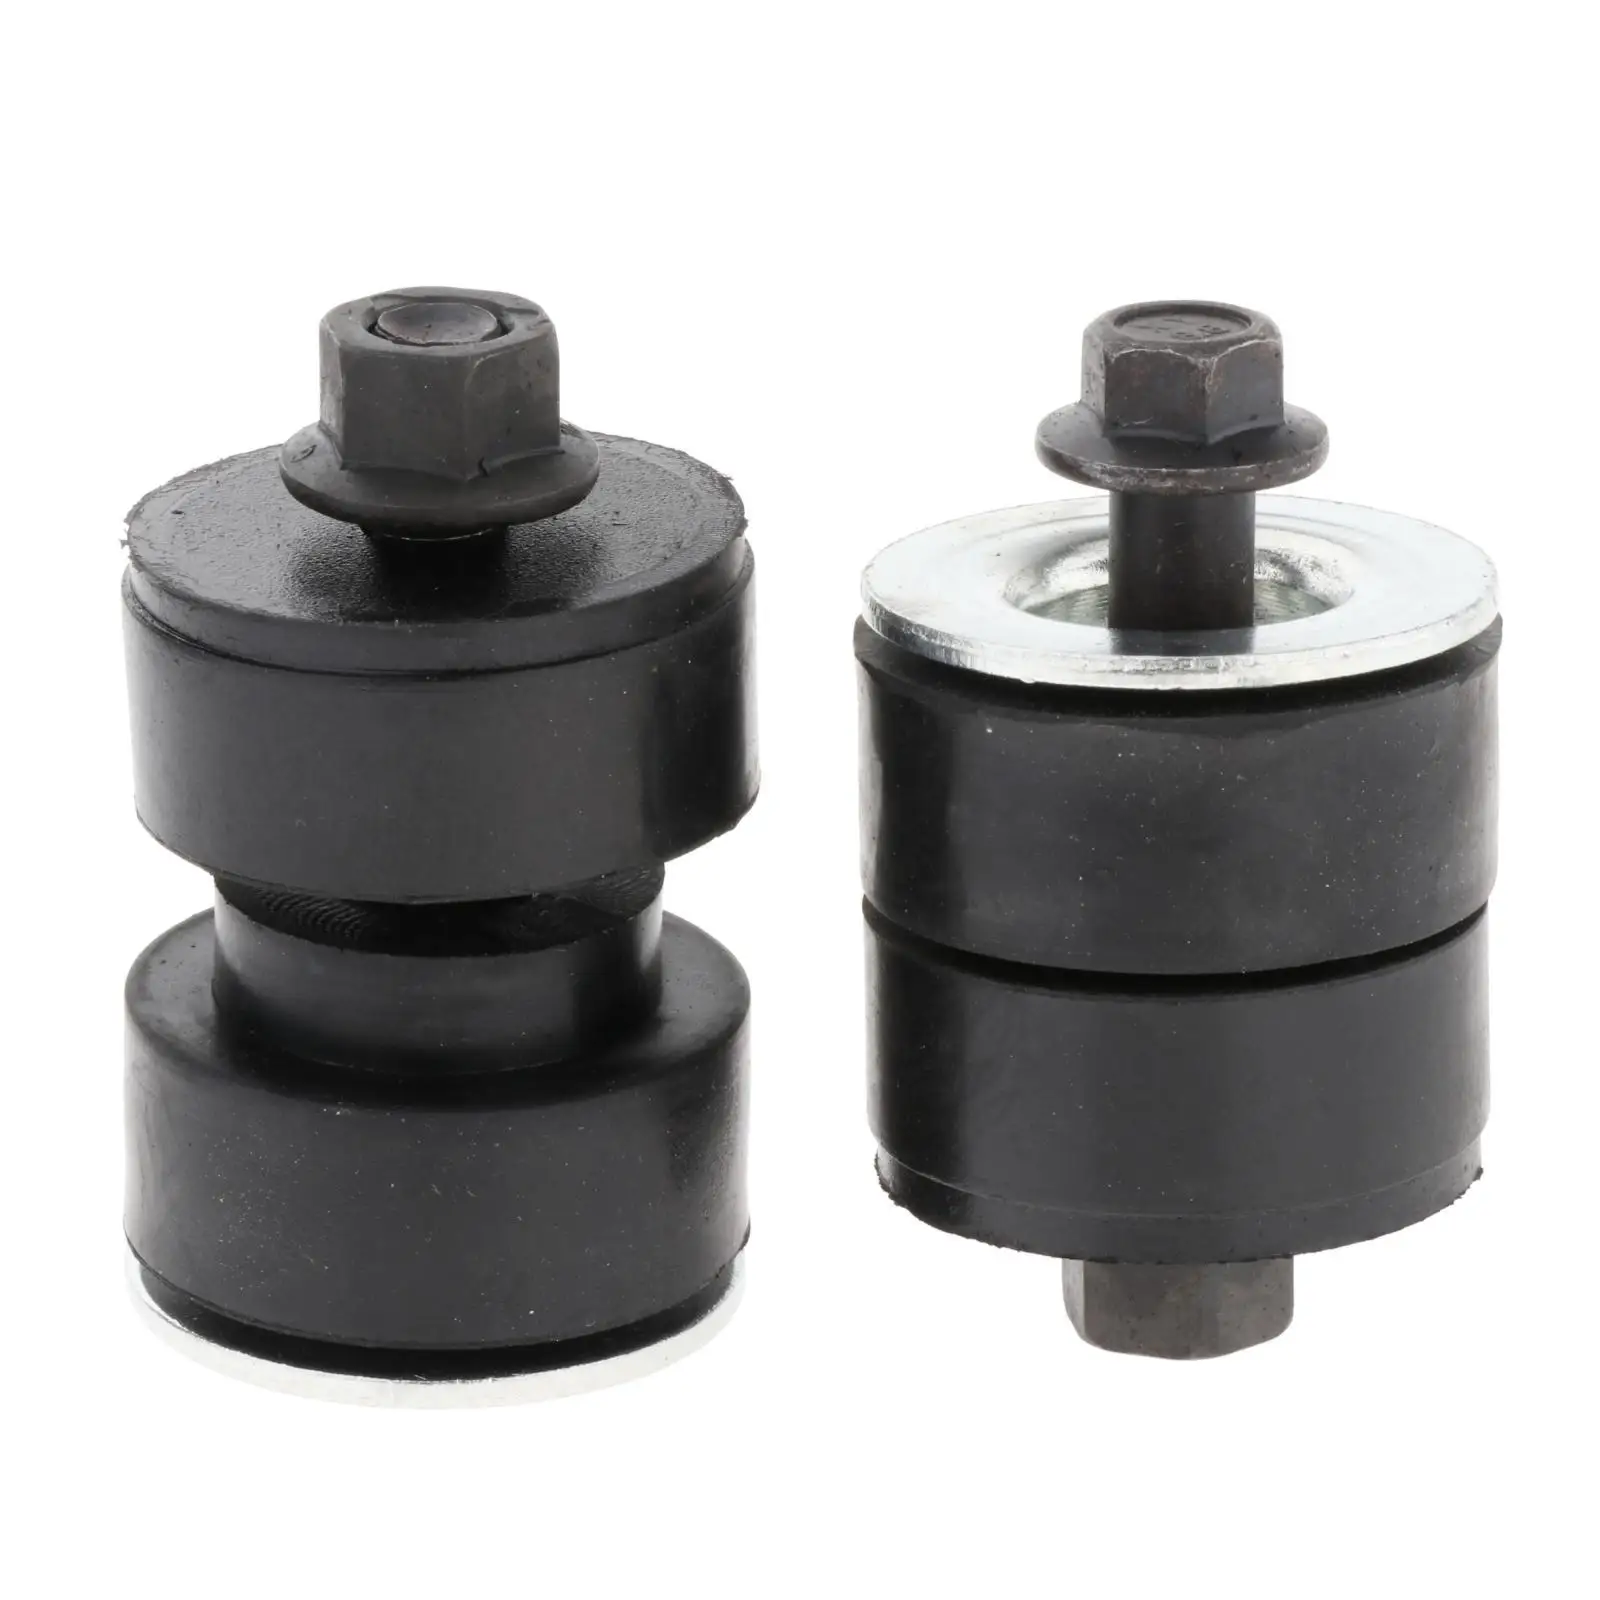 Radiator Rubber Mount Bushing Body Bolts Replacement 1967-1989 Accessories Support Body